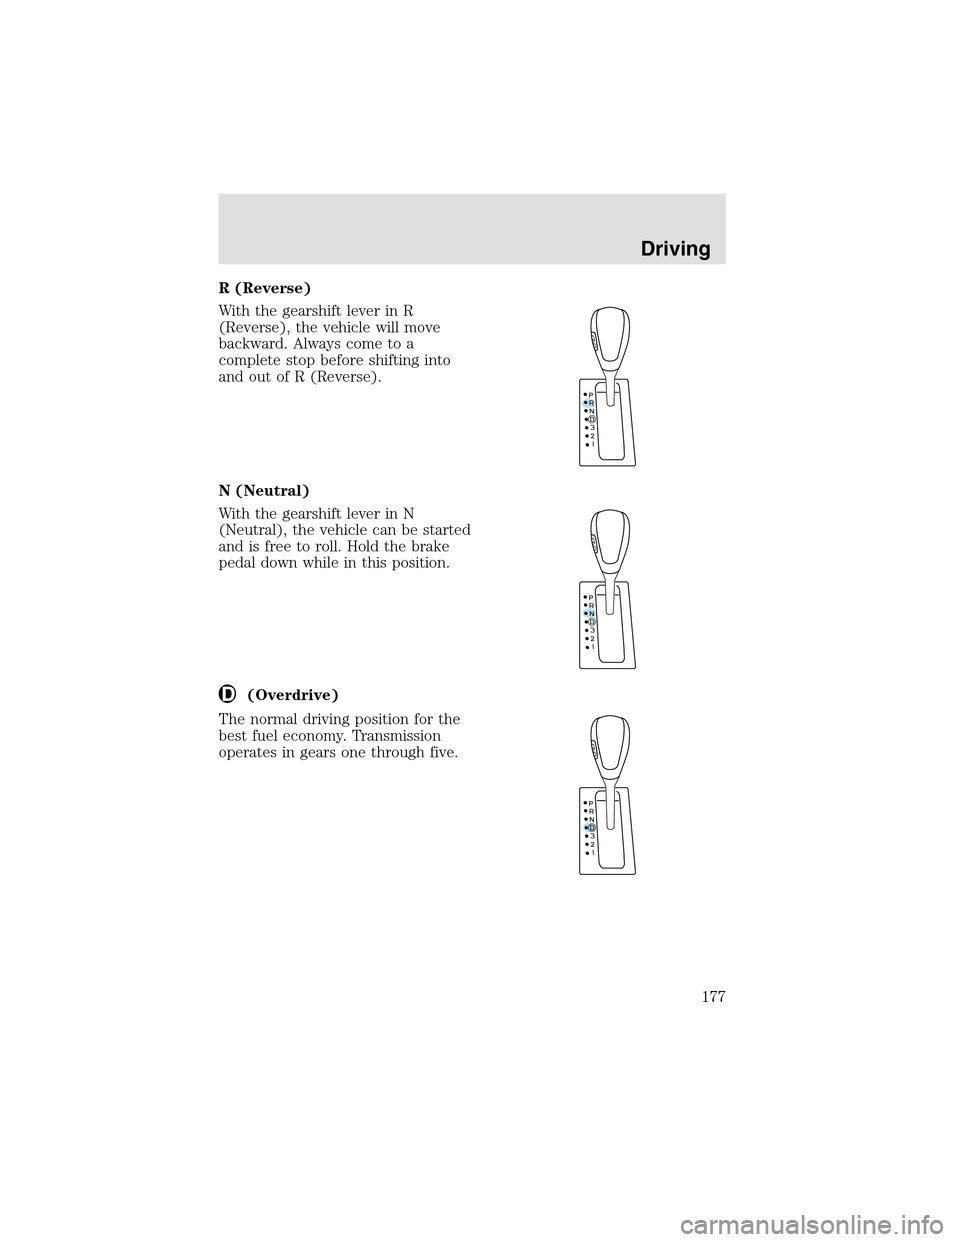 LINCOLN AVIATOR 2003  Owners Manual R (Reverse)
With the gearshift lever in R
(Reverse), the vehicle will move
backward. Always come to a
complete stop before shifting into
and out of R (Reverse).
N (Neutral)
With the gearshift lever in